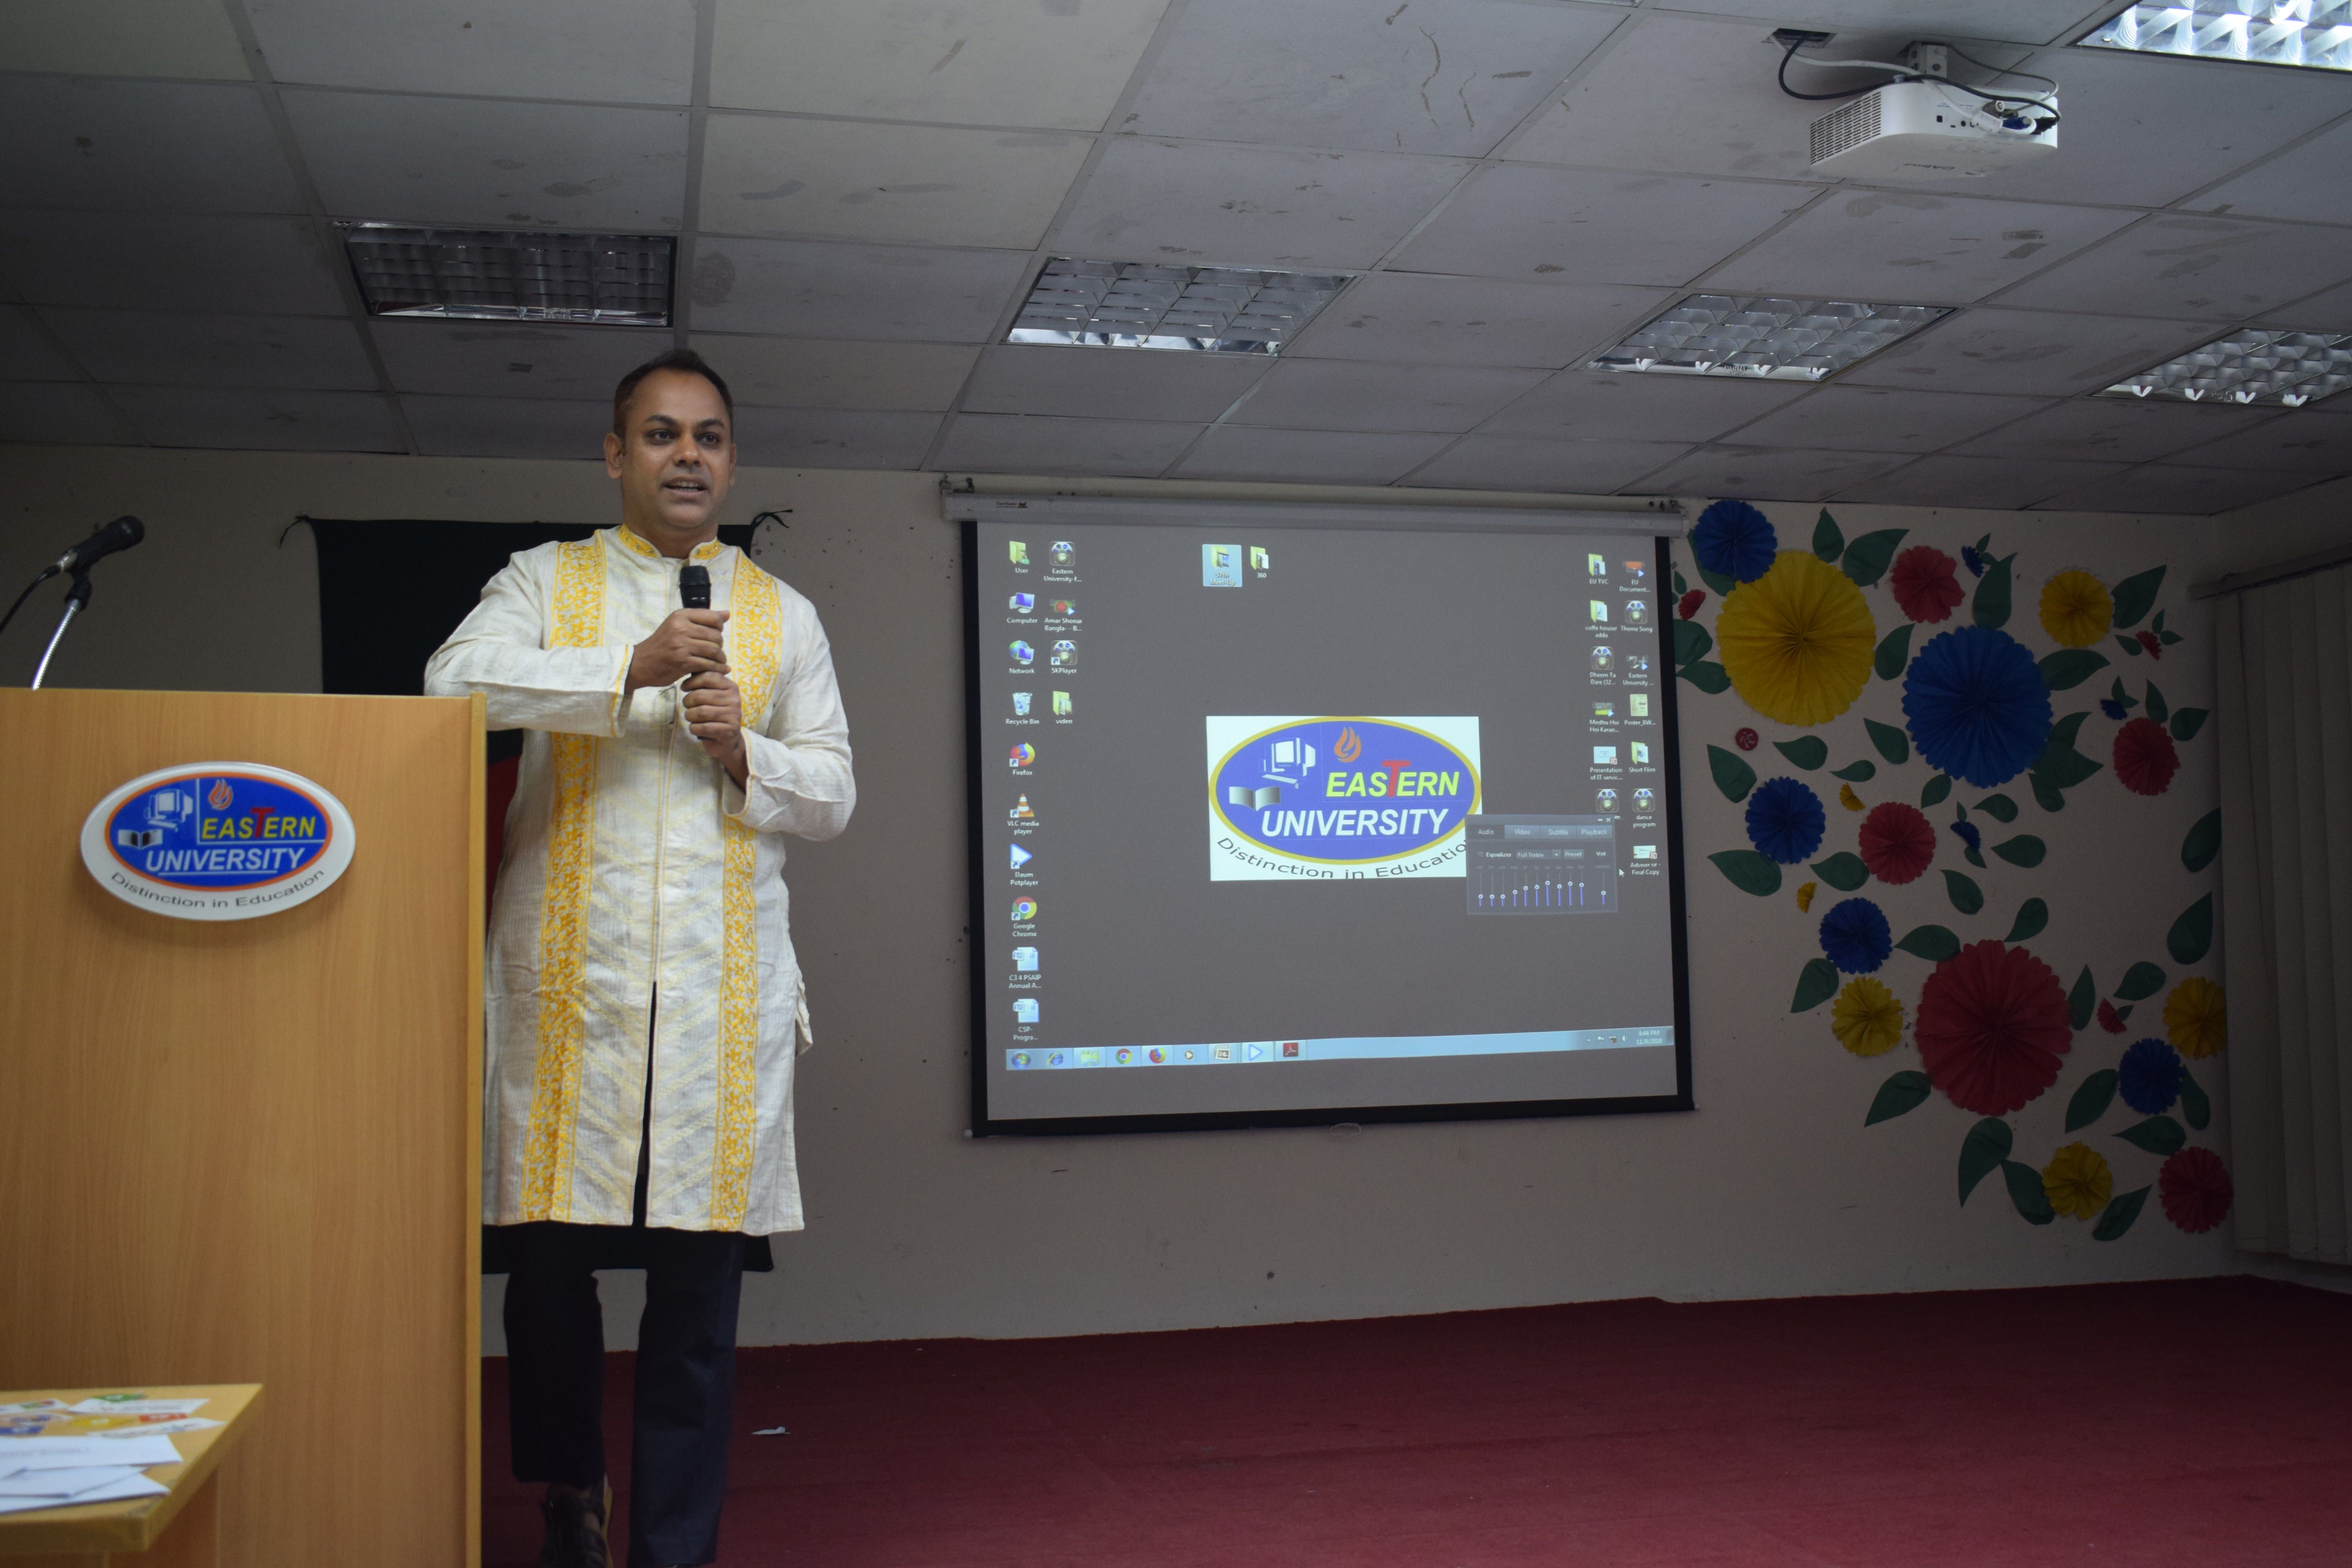 Professor Dr. Mahfuzur Rahman, Dean, Faculty of Engineering and Technology, Eastern University, speaks at the 97th meet-up of Google Local Guides Bangladesh. Photo Courtesy: Google Local Guides Bangladesh